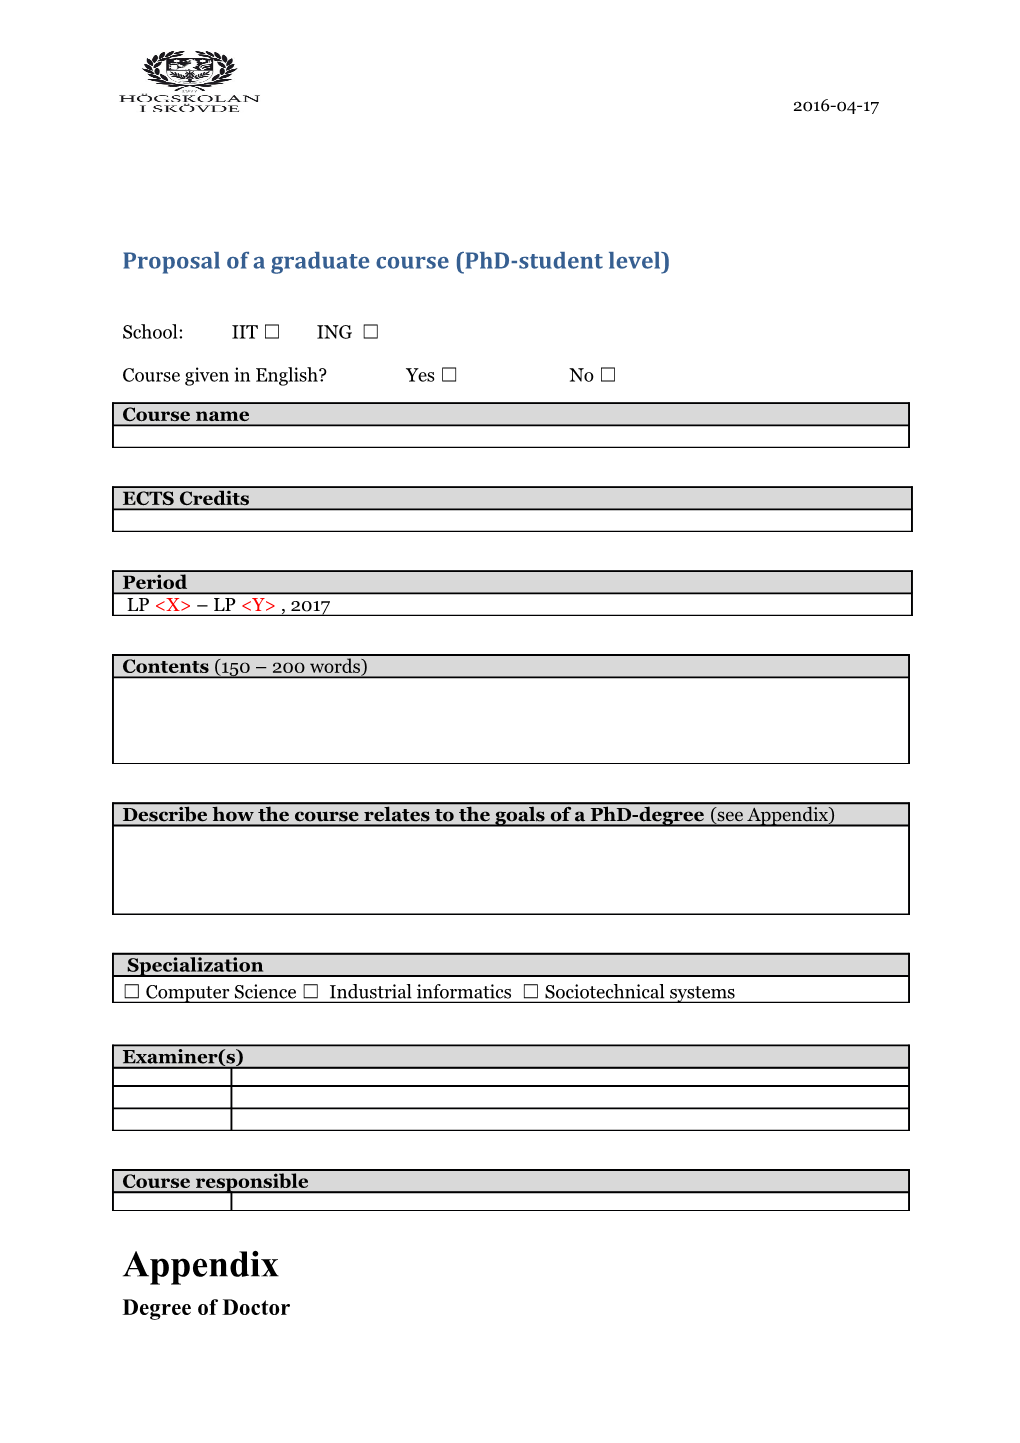 Proposal of a Graduate Course (Phd-Student Level)